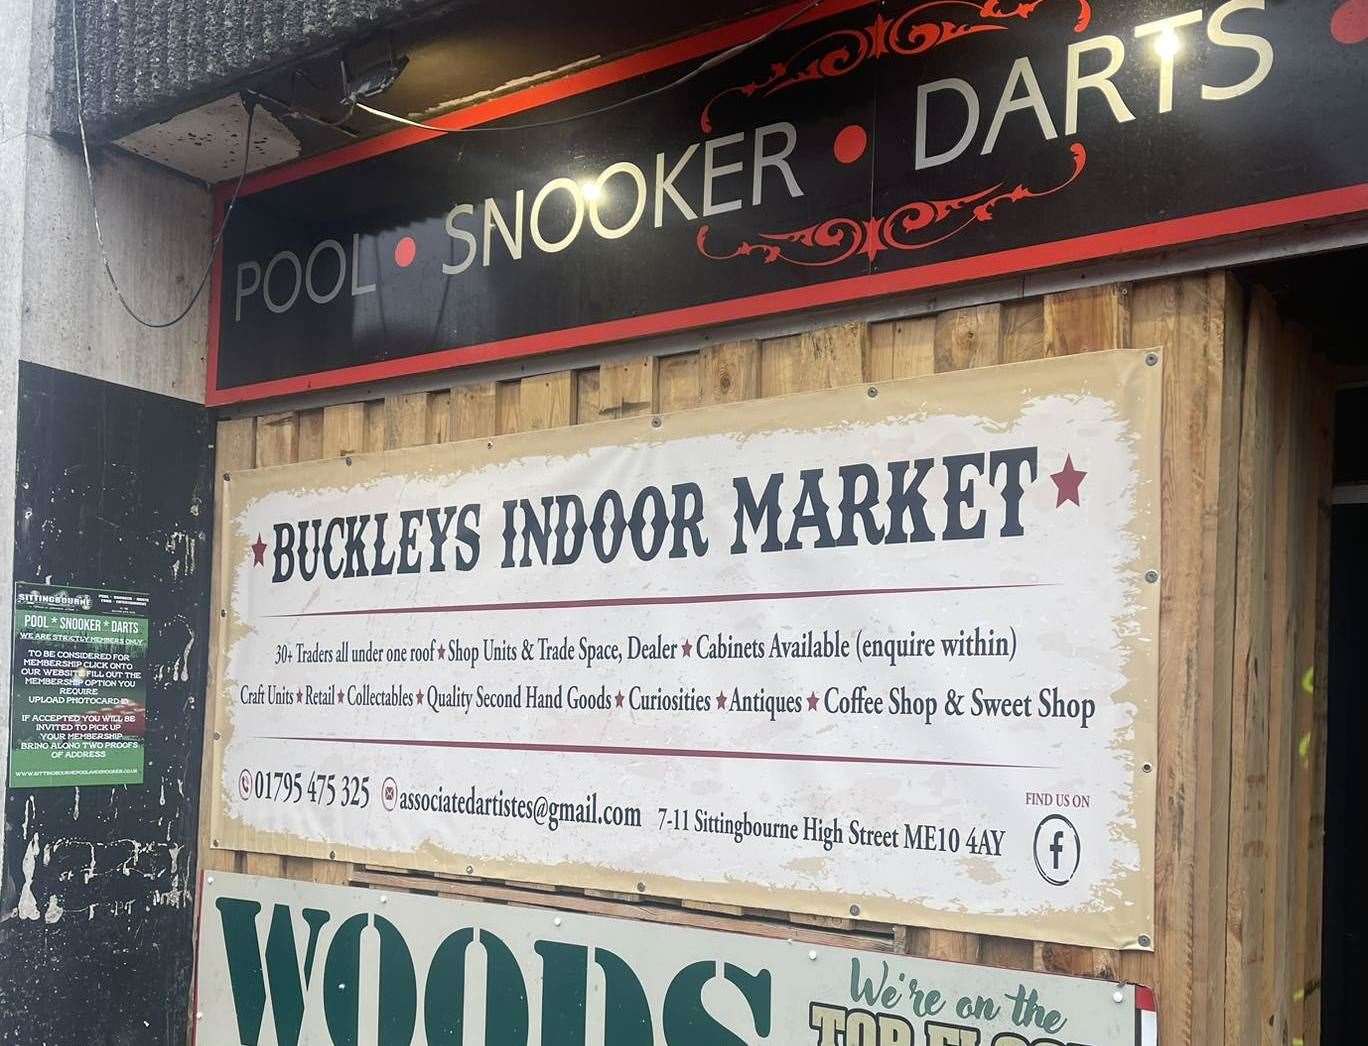 Buckley's indoor market will be opening in the former snooker club in Sittingbourne High Street